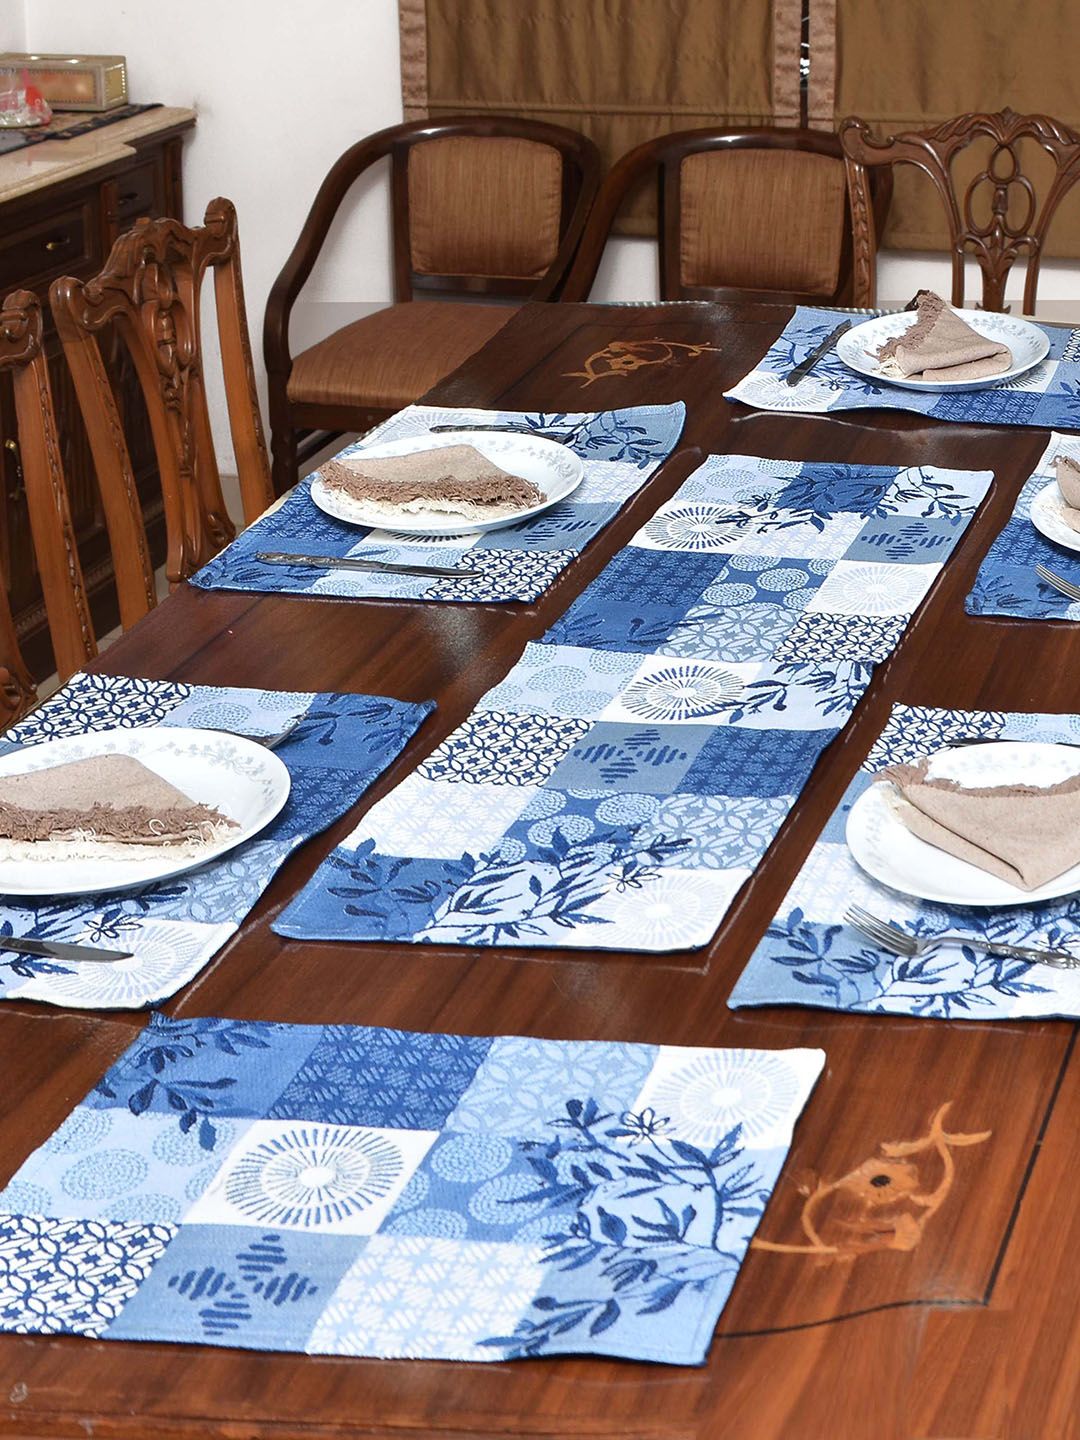 Avira Home Set of 7 Blue & White Woven Table Placemats With Runner Price in India